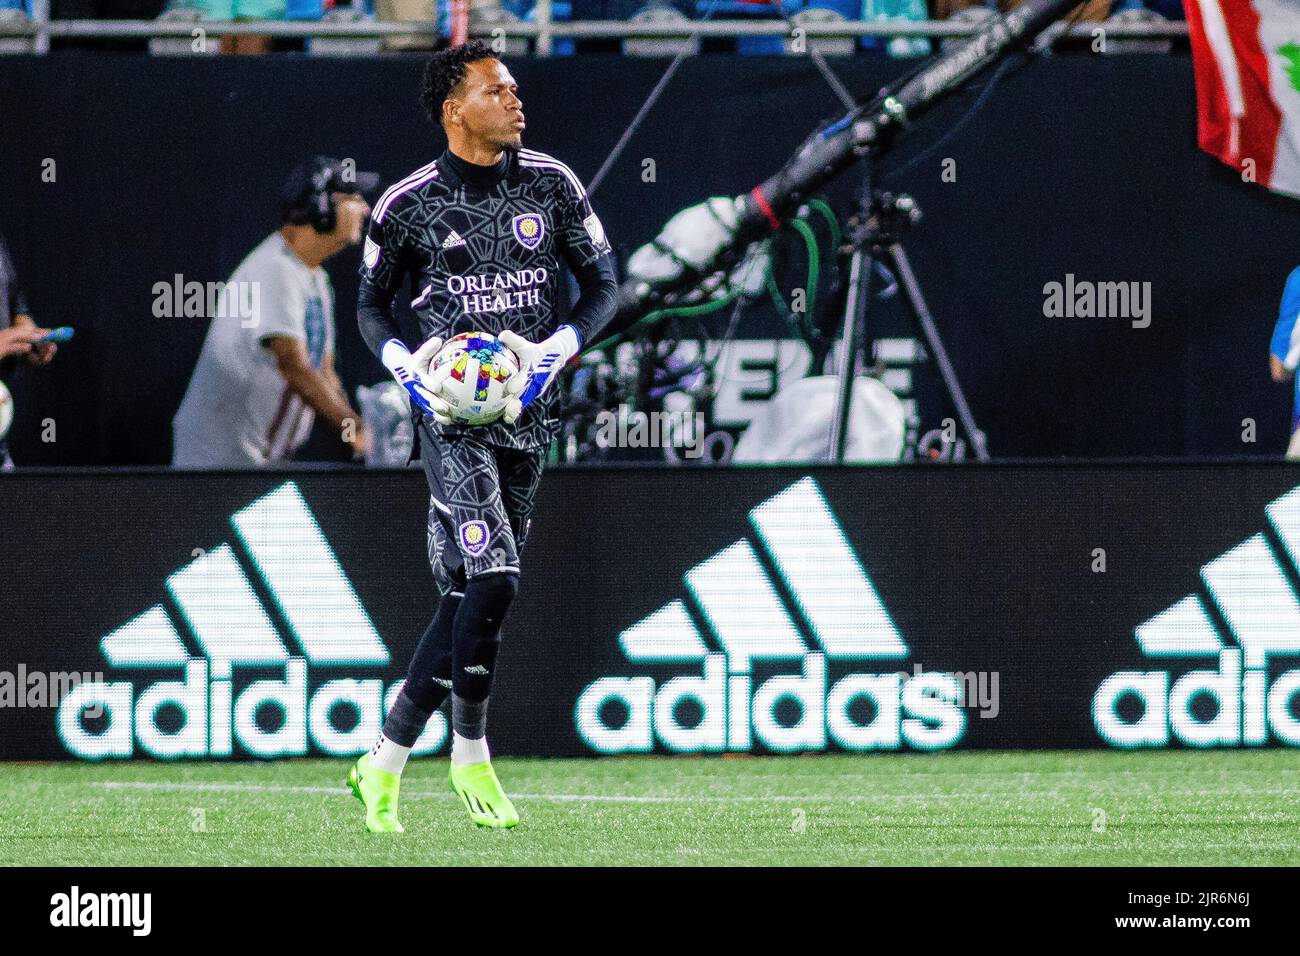 August 21, 2022: Orlando City goalkeeper Pedro Gallese (1) brings the ball into play during the second half against the Charlotte FC in the Major League Soccer match up at Bank of America Stadium in Charlotte, NC. (Scott Kinser) Stock Photo